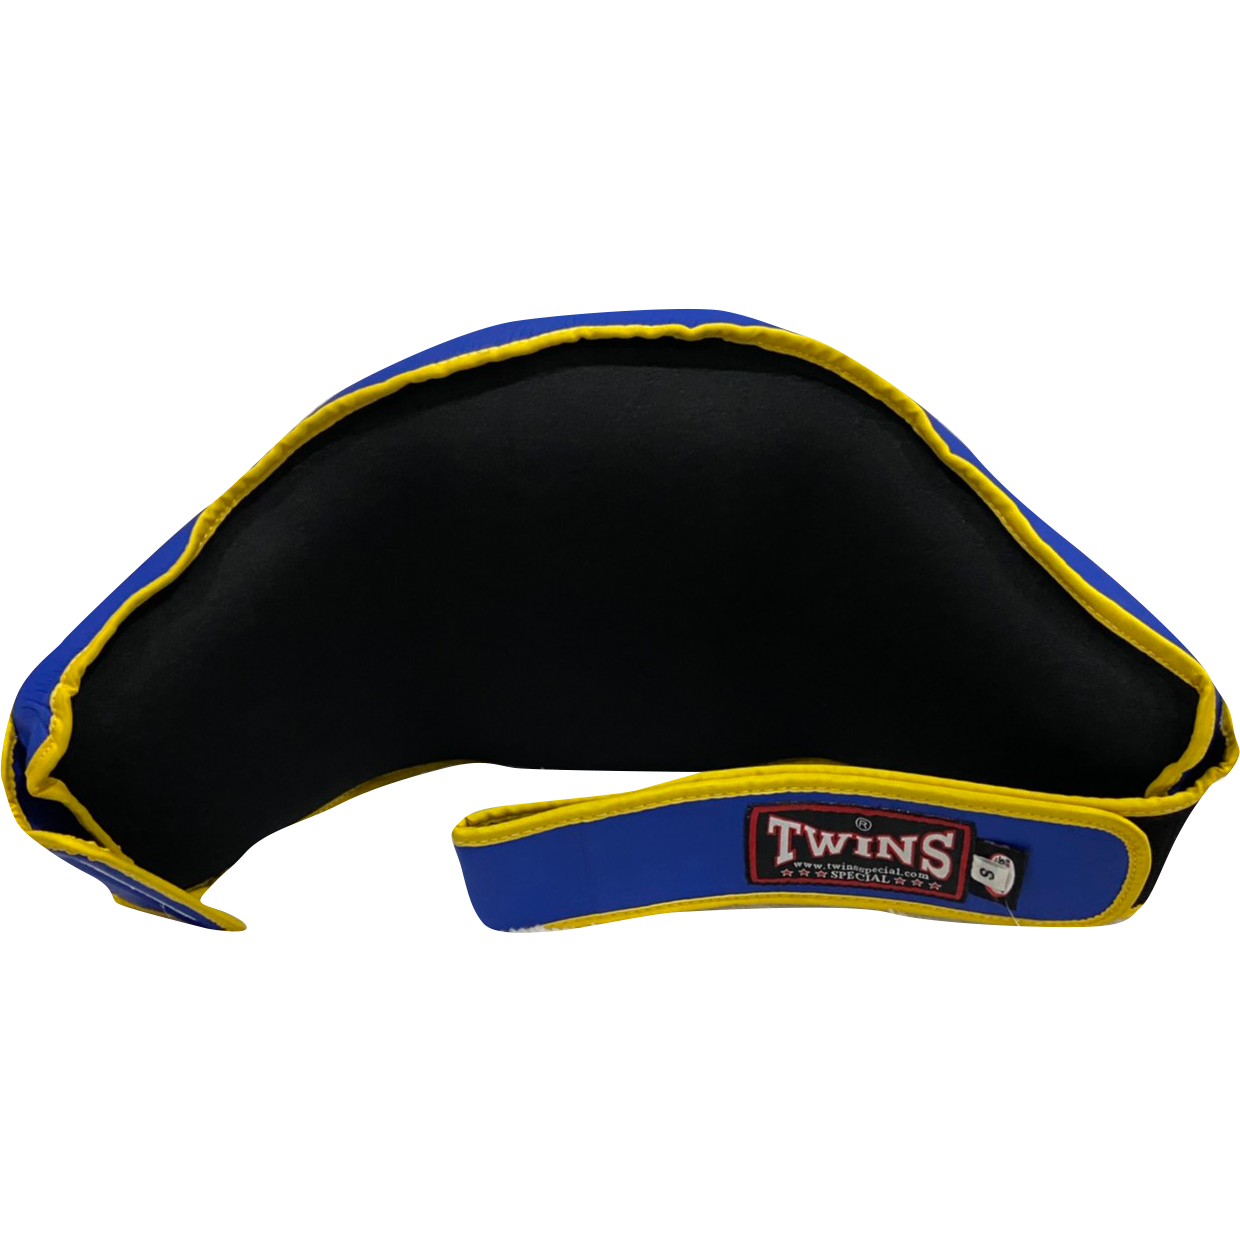 Twins Special Belly Pad BEPS4 Blue